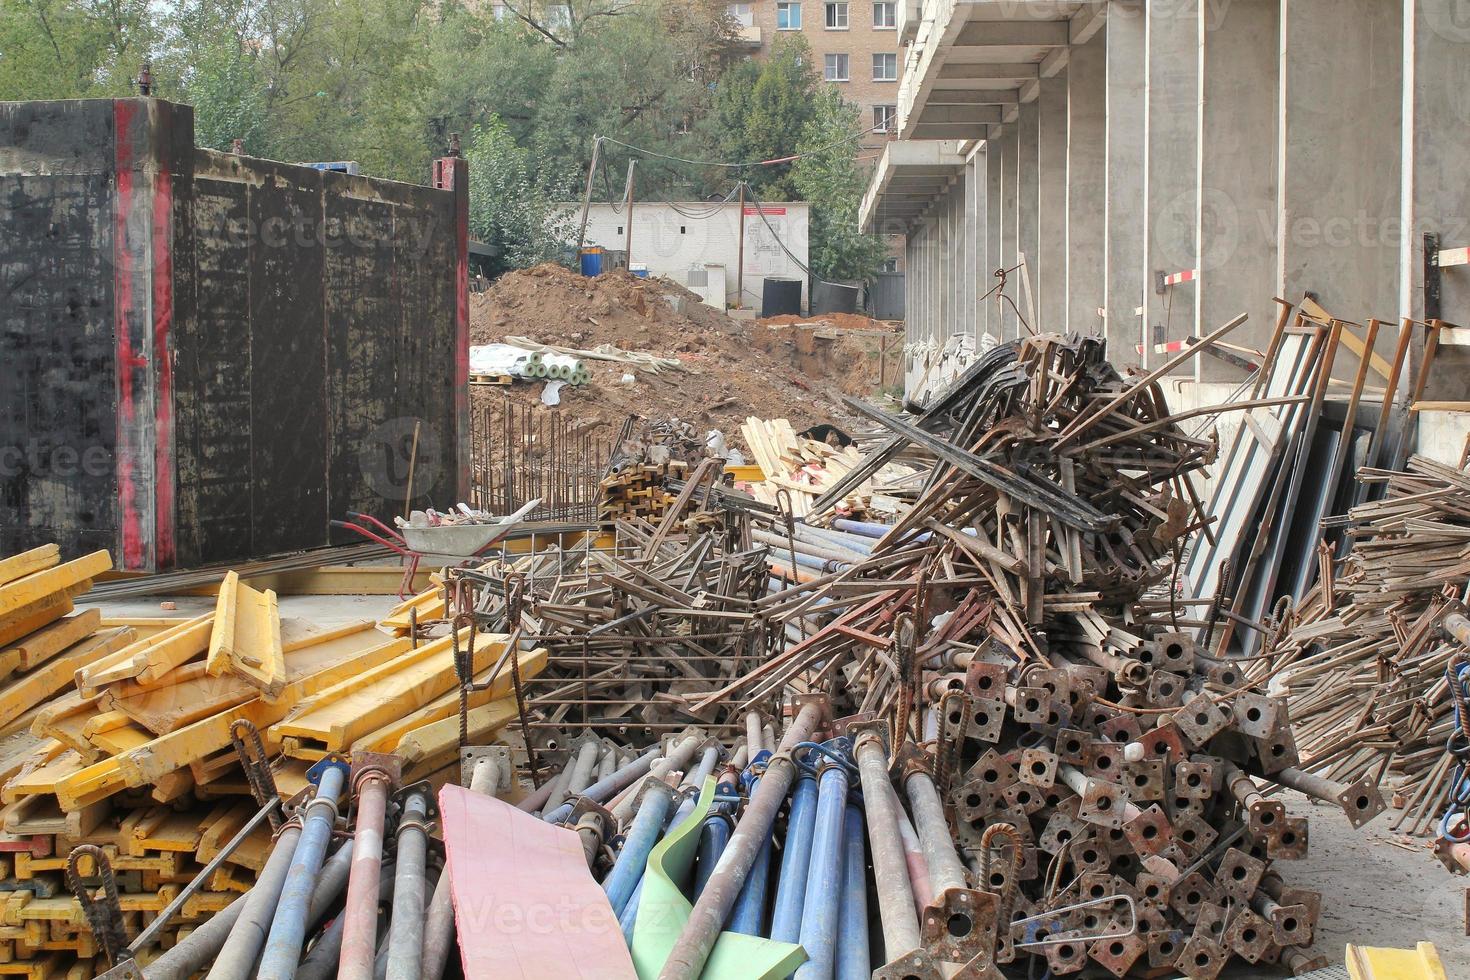 Pile of metal pipeline construction materials, iron profiles, steel rods for scaffolding on a building site. Renovation, planning, repair modern civil house. Concept of development improvement town photo